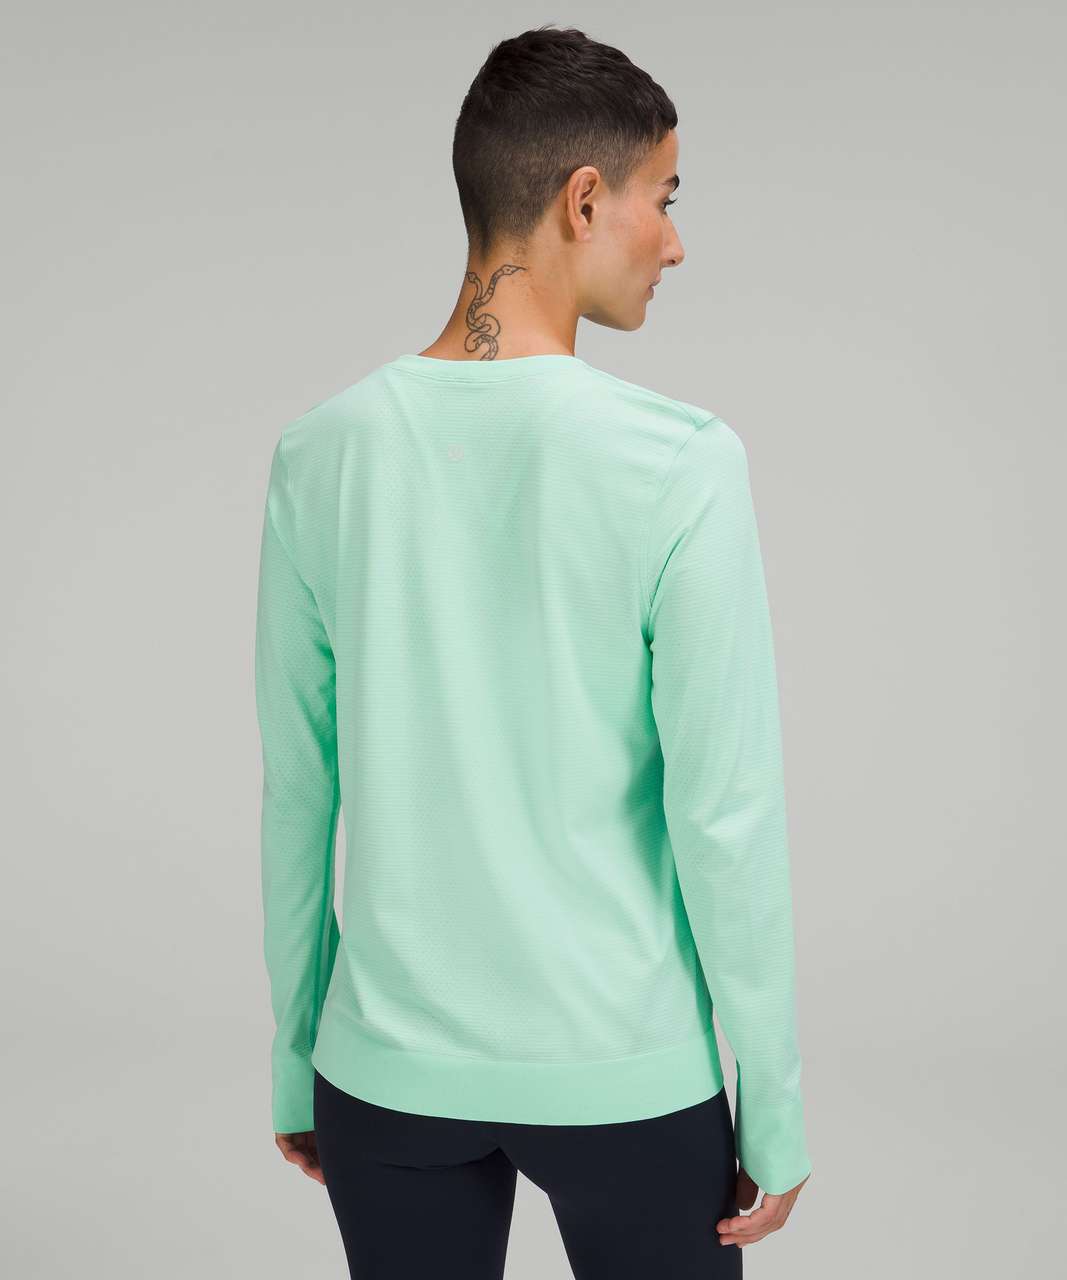 Lululemon Swiftly Breathe Relaxed-Fit Long Sleeve Shirt - ShopStyle  Activewear Tops